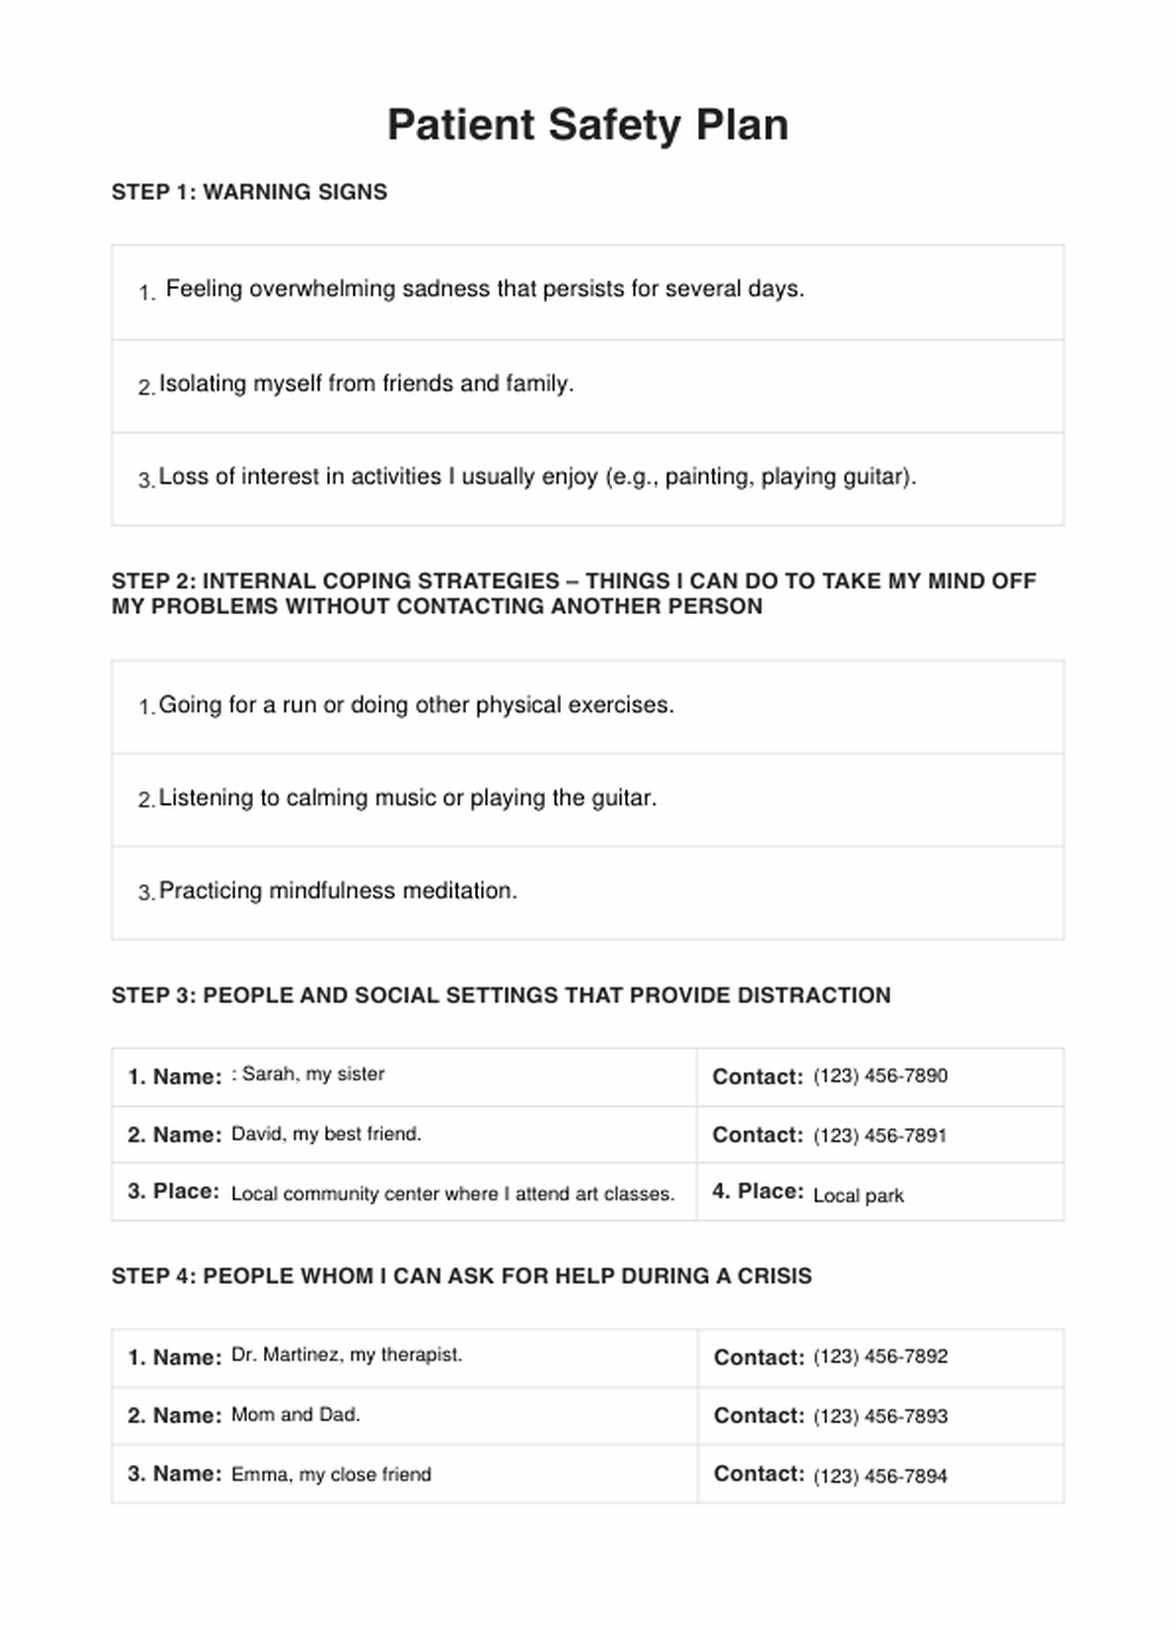 Safety Plans PDF Example